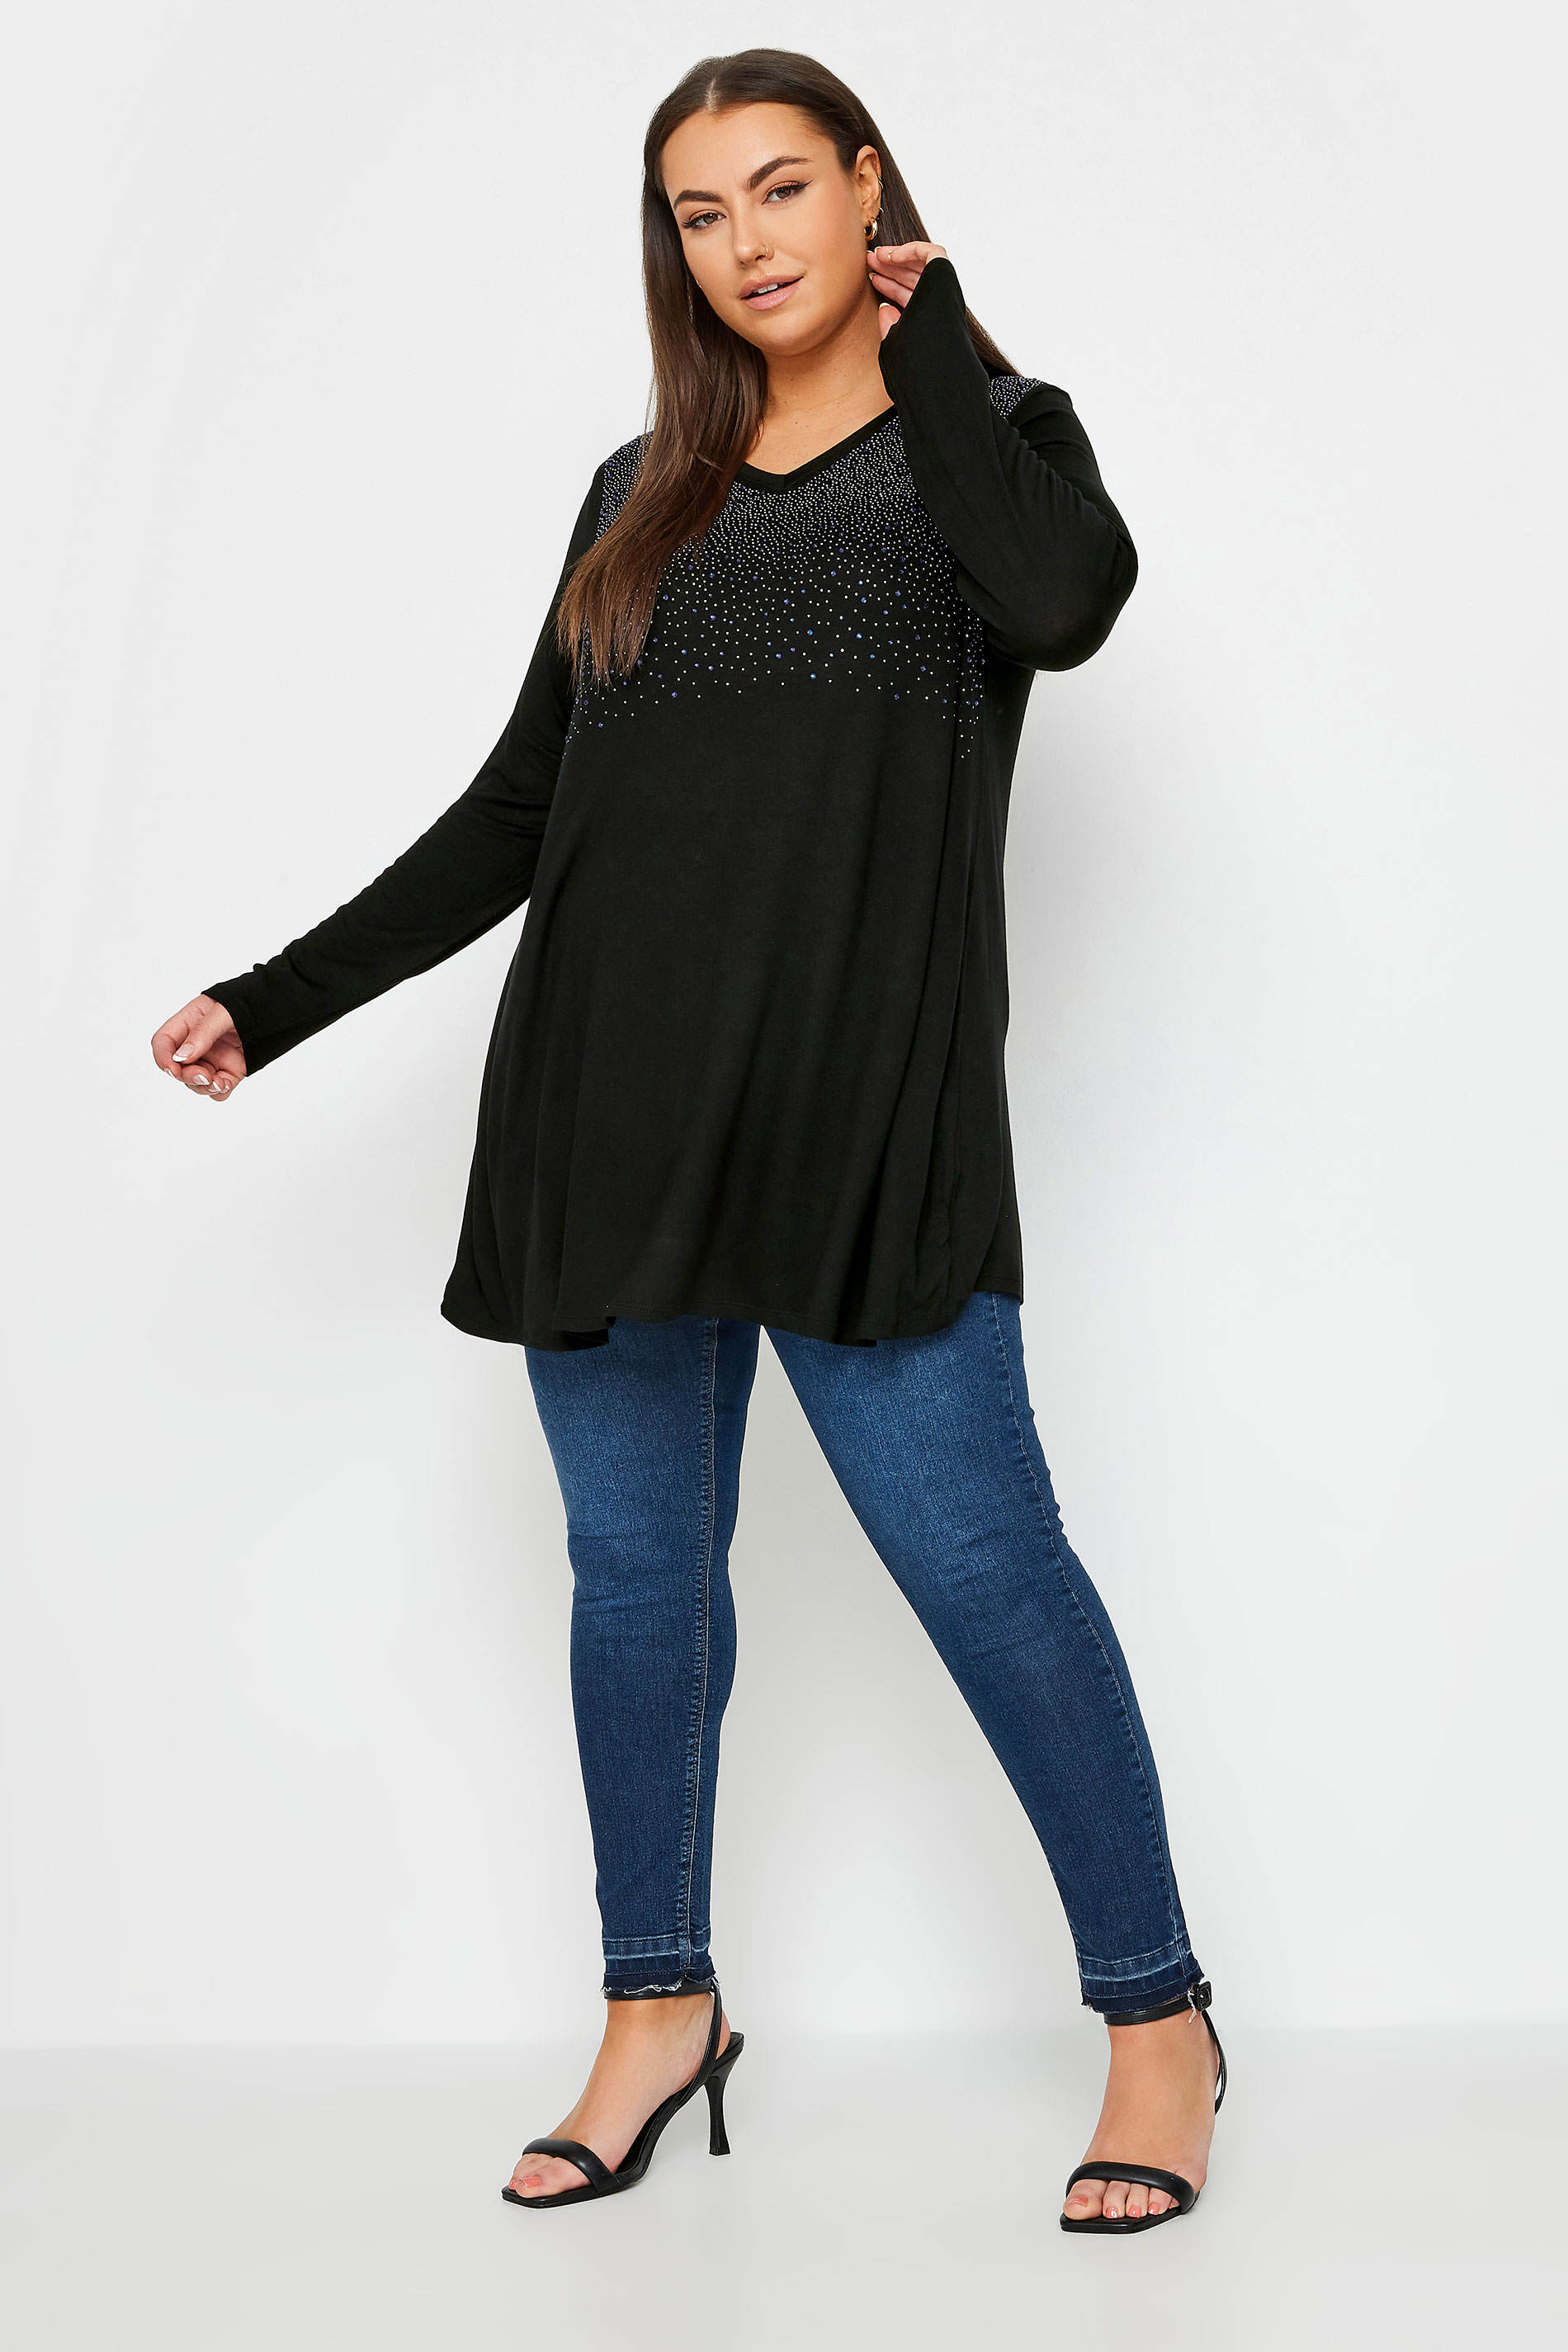 YOURS Plus Size Black Stud Embellished Top | Yours Clothing 2